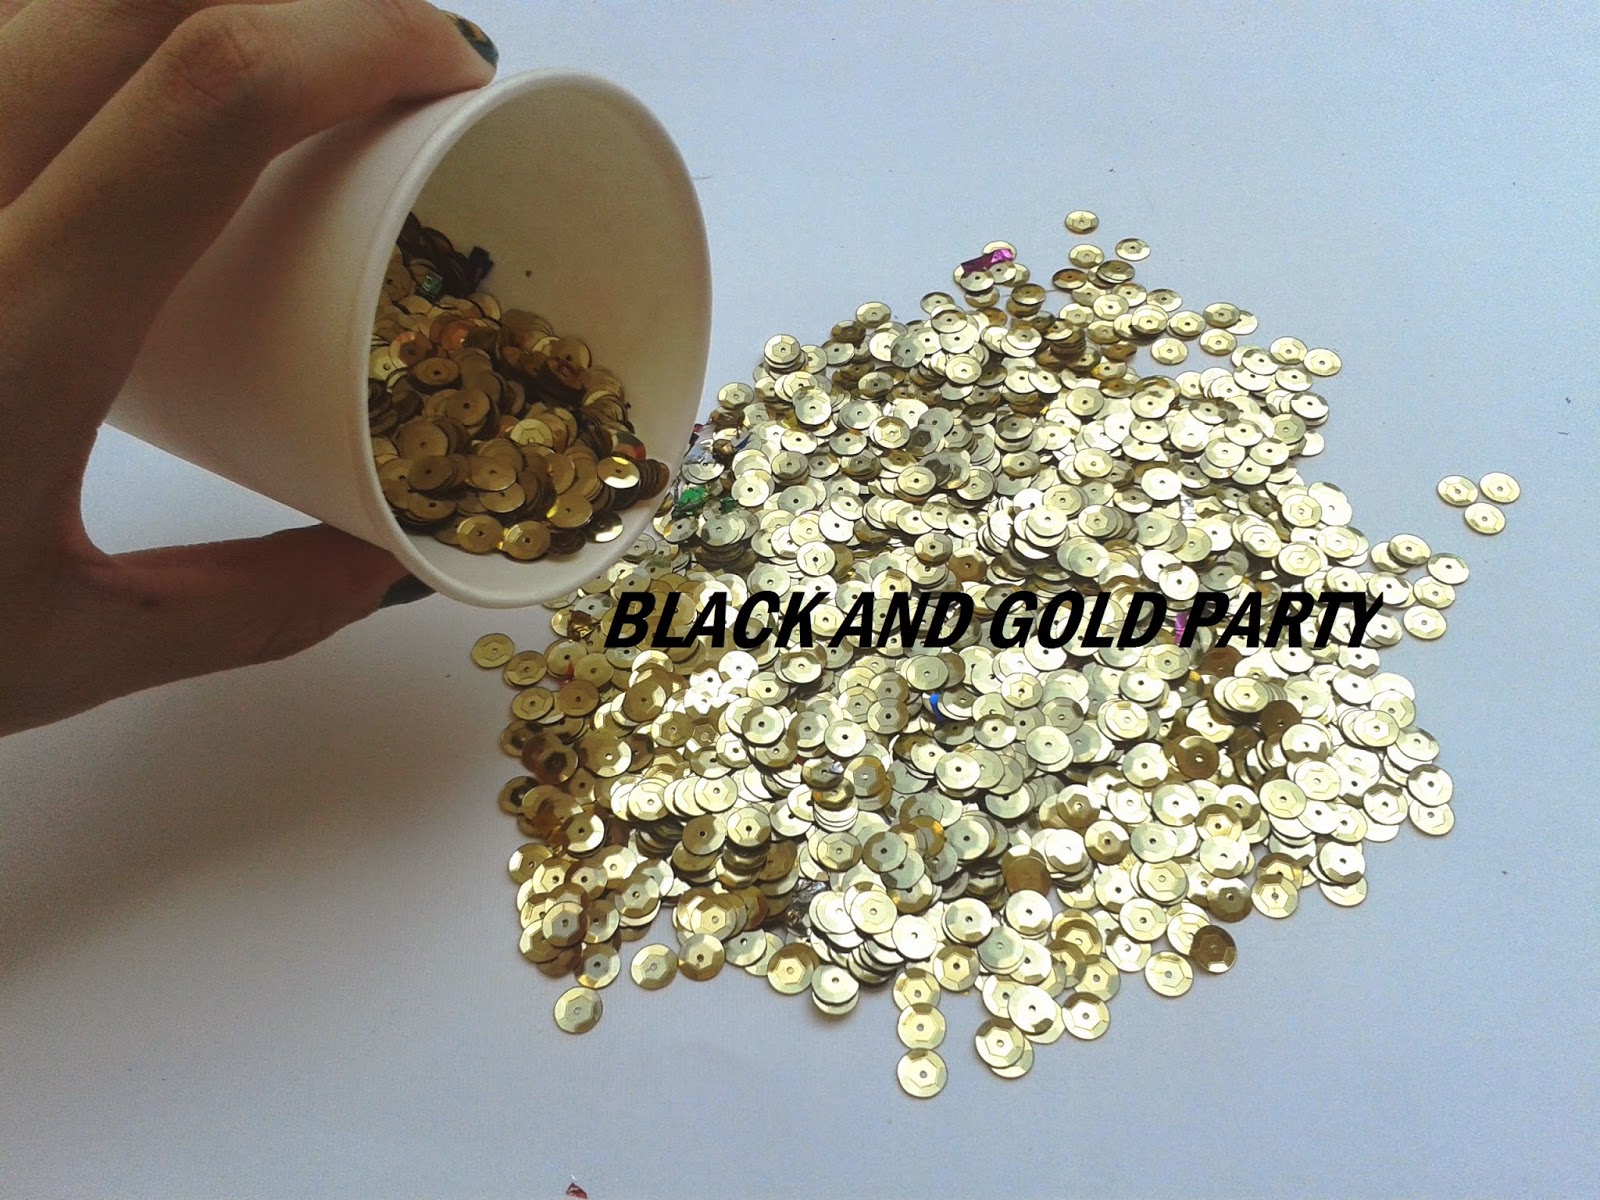 Let's light up your party with us~: Black and Gold Party Supplies